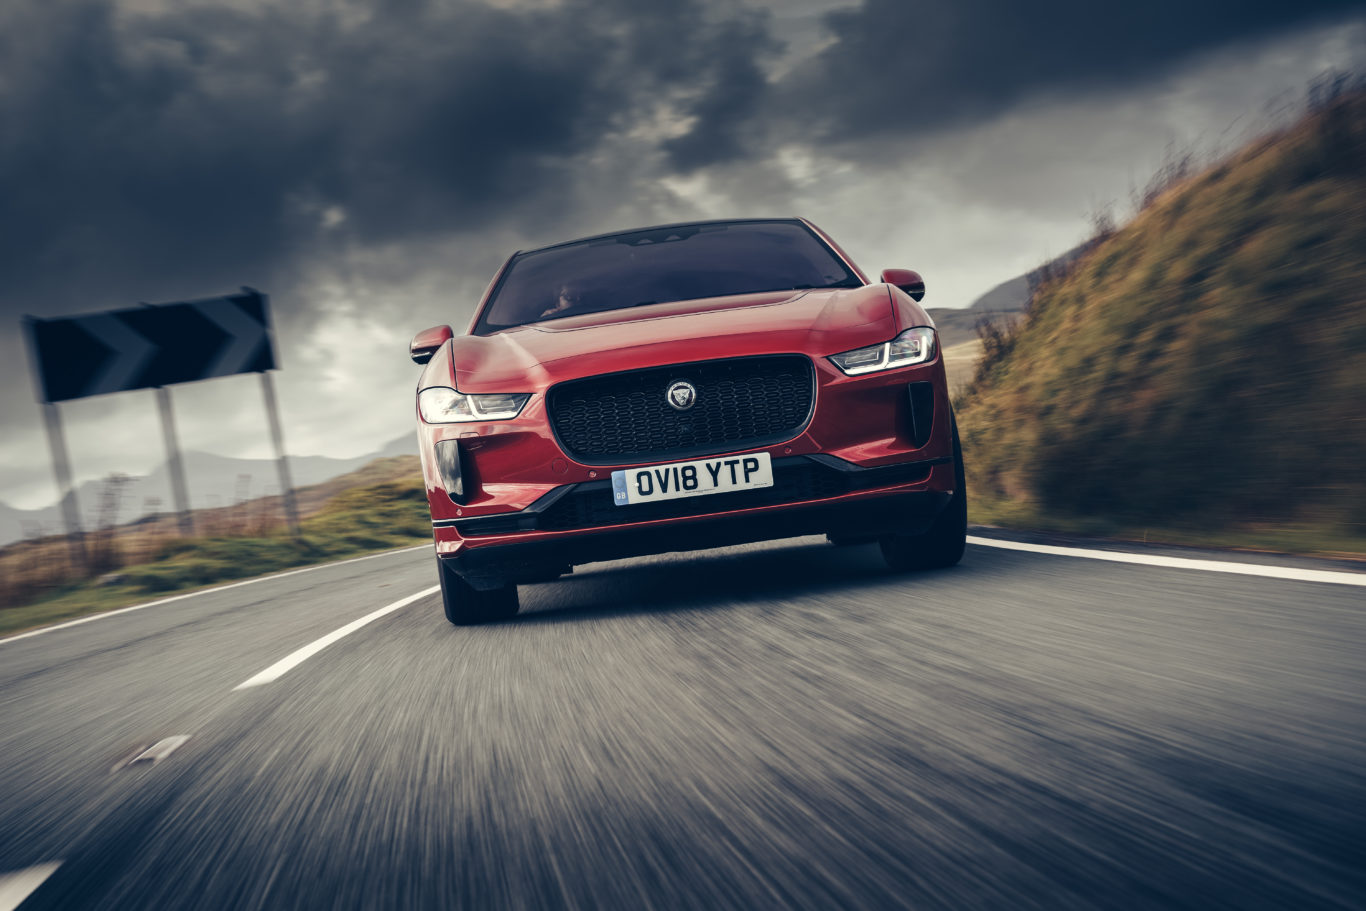 A well-sorted ride makes the I-Pace well-suited to all road surfaces